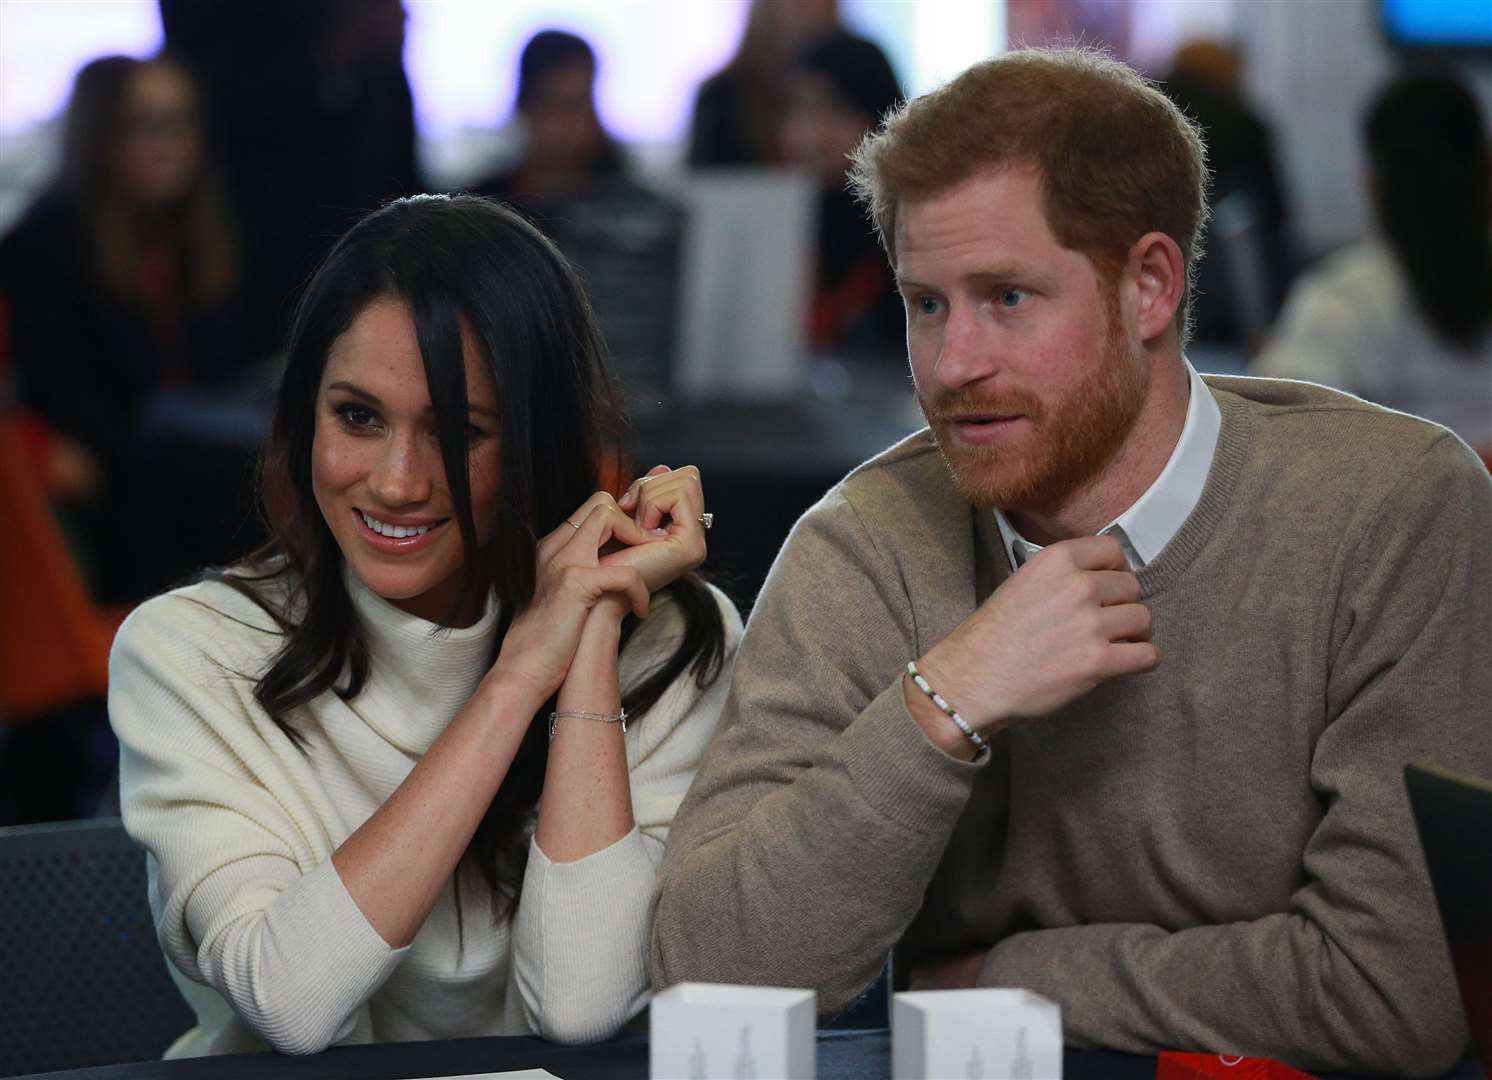 Prince Harry is easily led by his 'uxurious passion' for Meghan Markle, writes one reader Picture: Ian Vogler/Daily Mirror/PA Wire